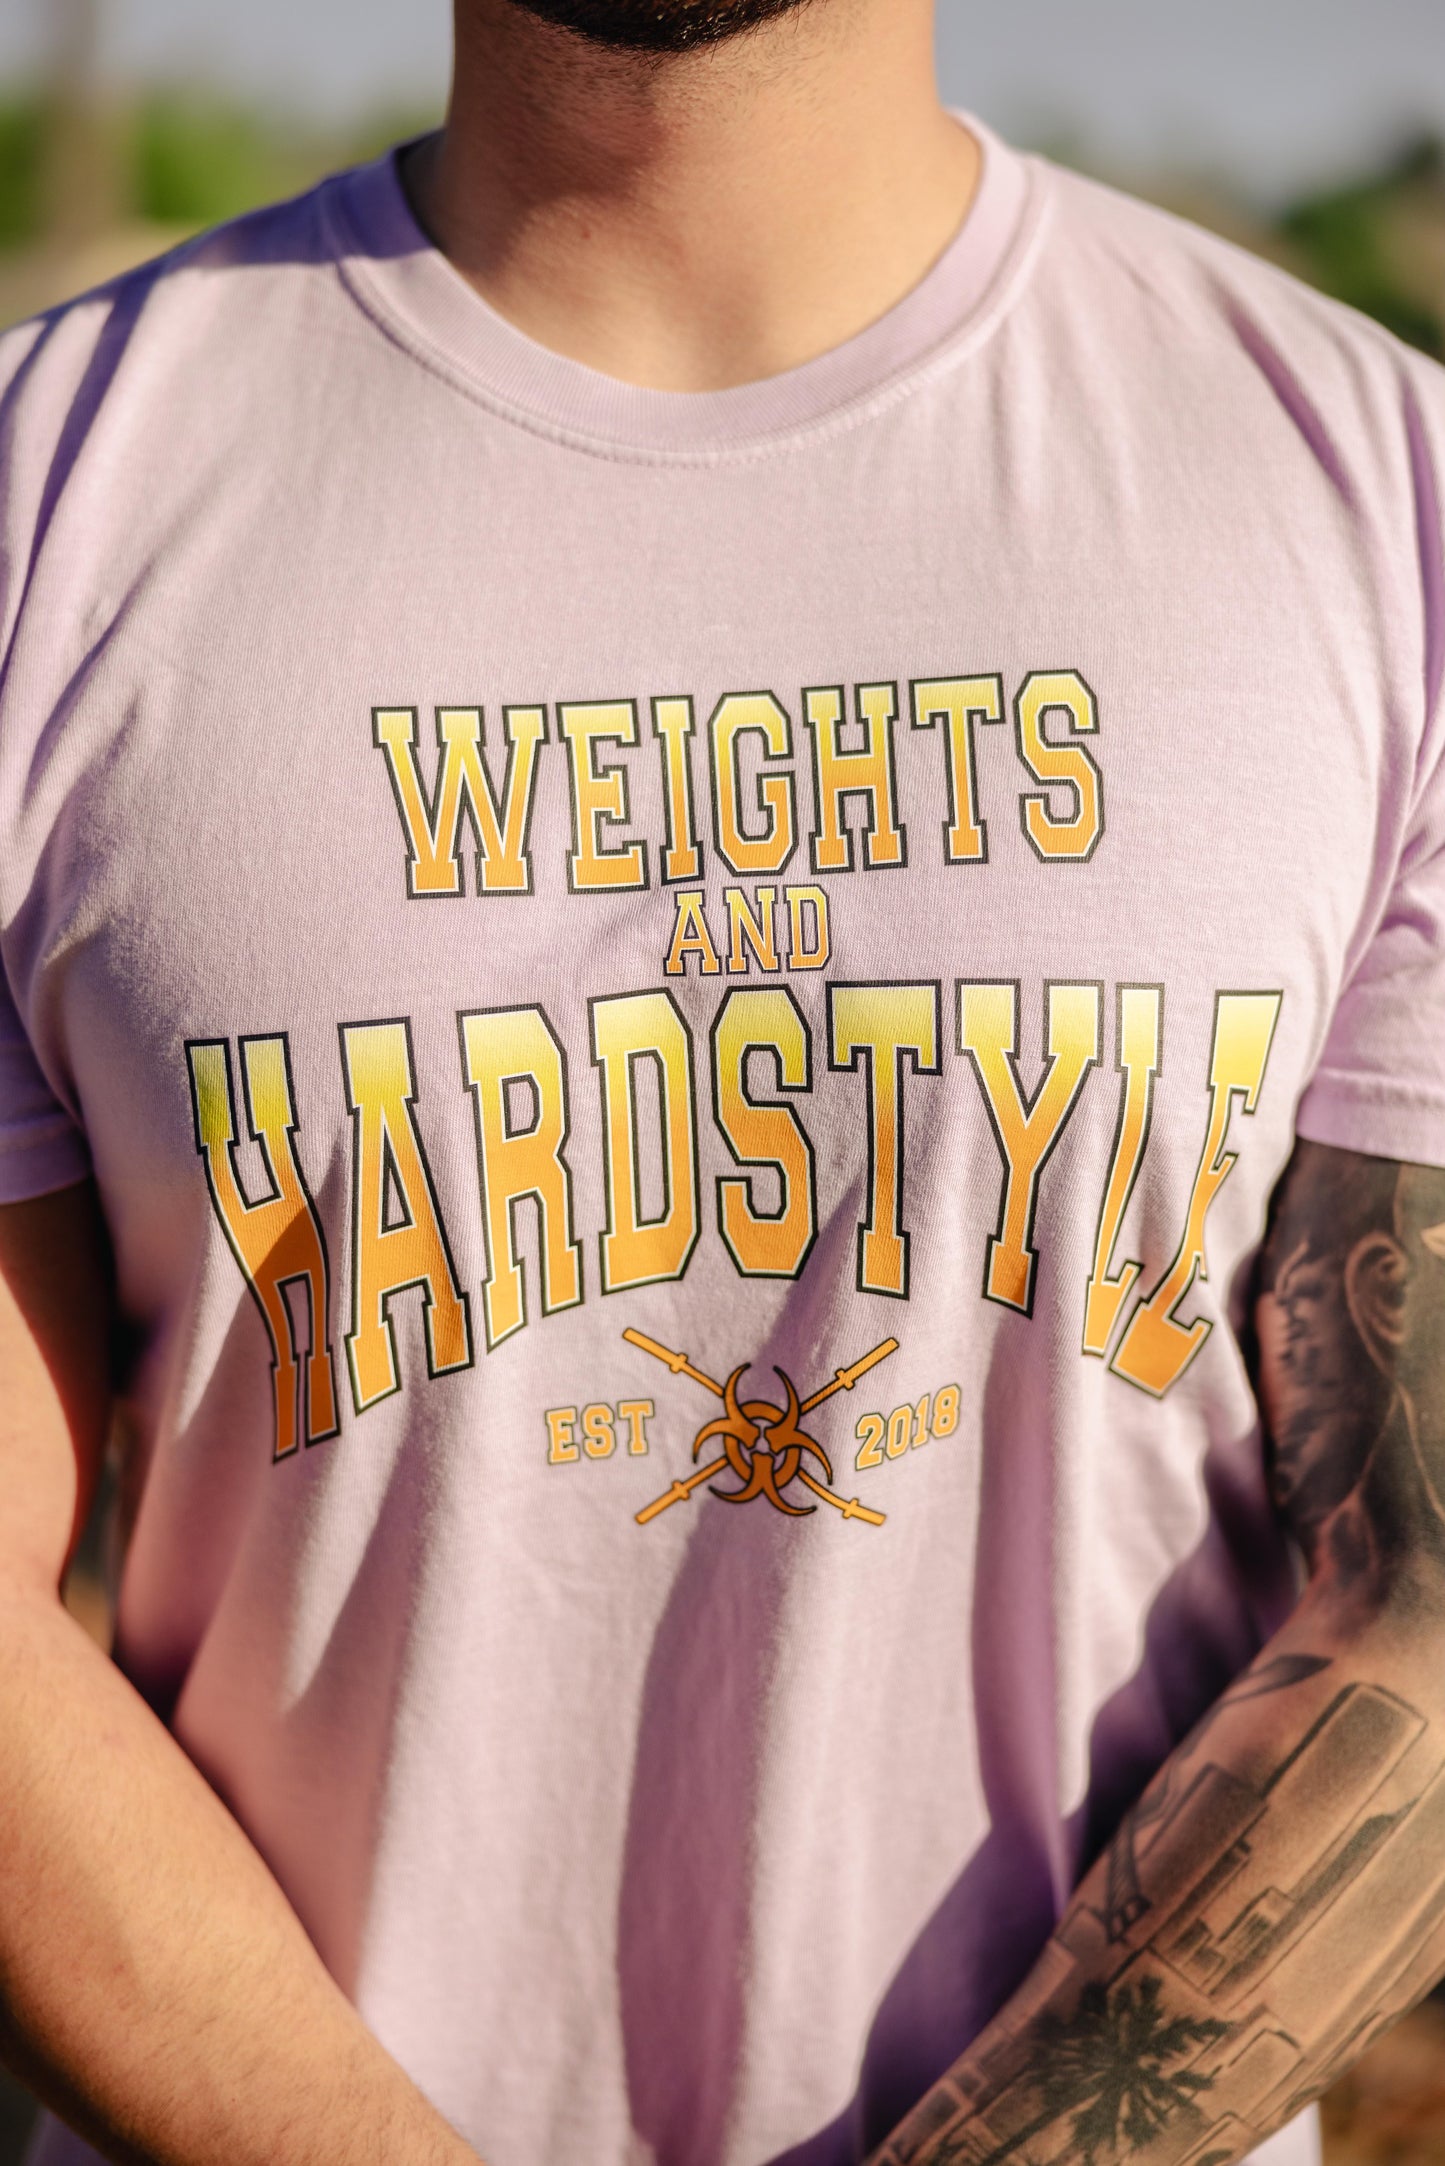 Weights and Hardstyle 3.0